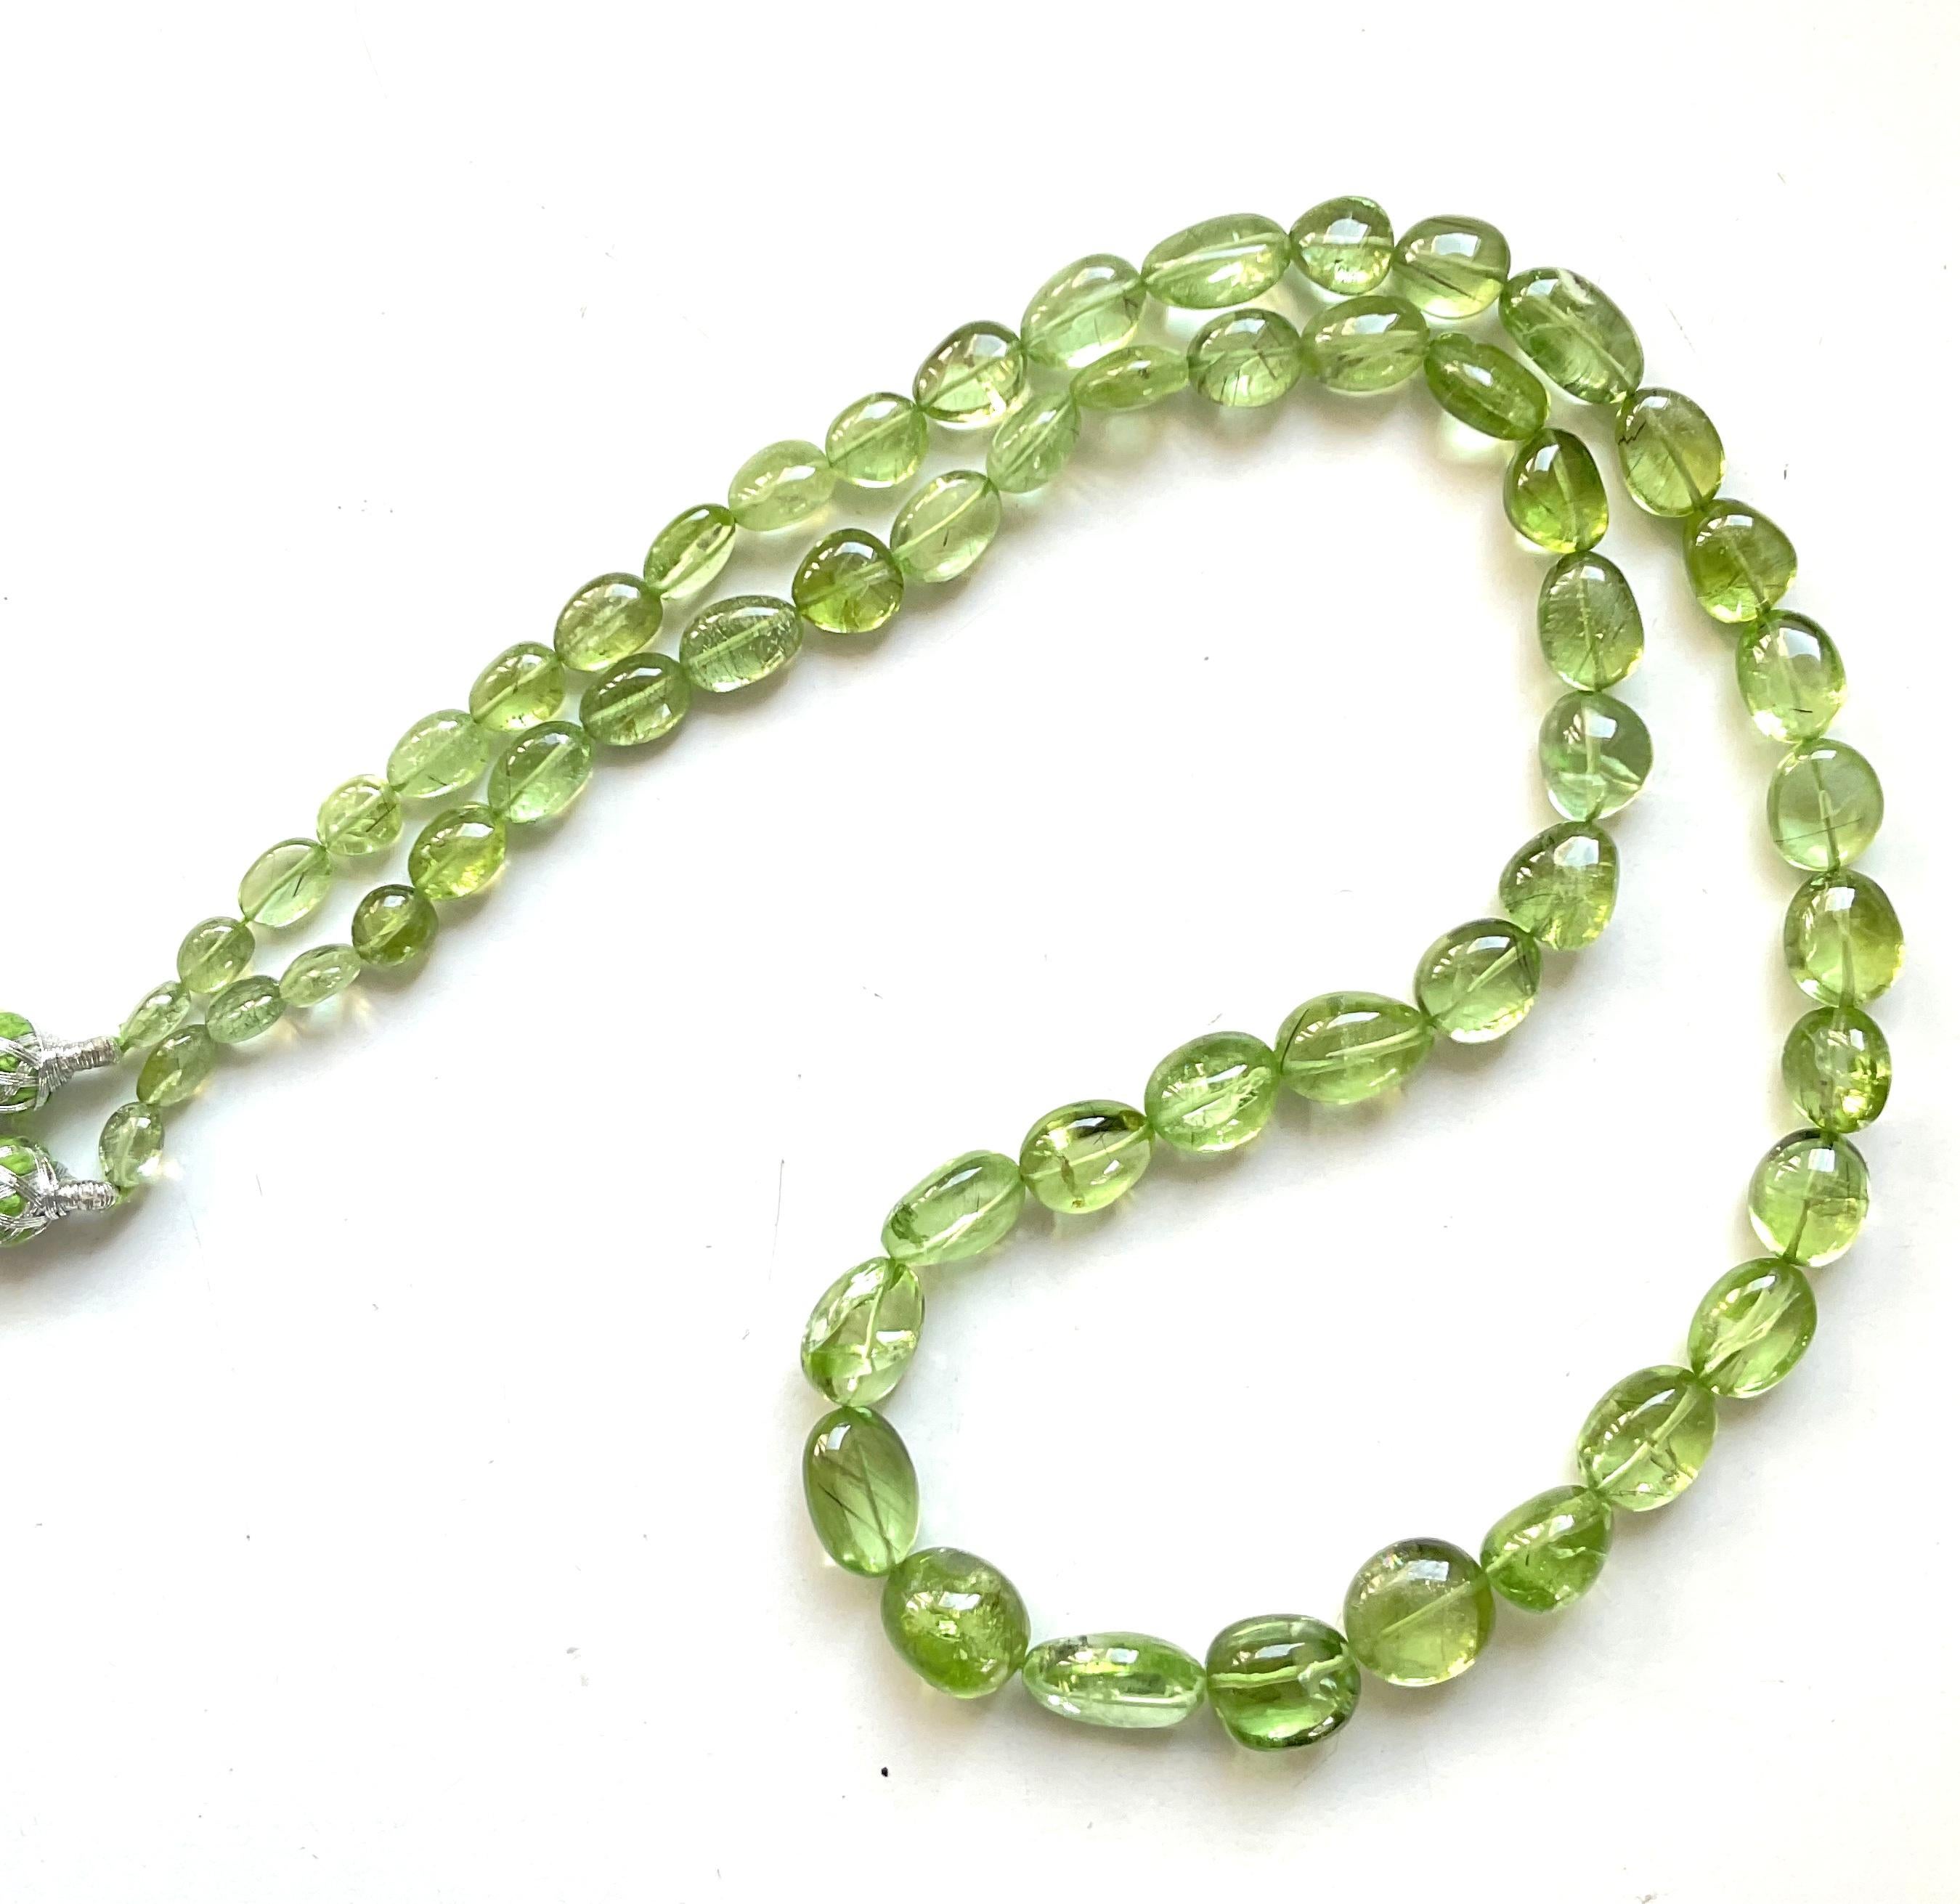 Tumbled 233.75 carats apple green peridot top quality plain tumbled natural necklace gem For Sale